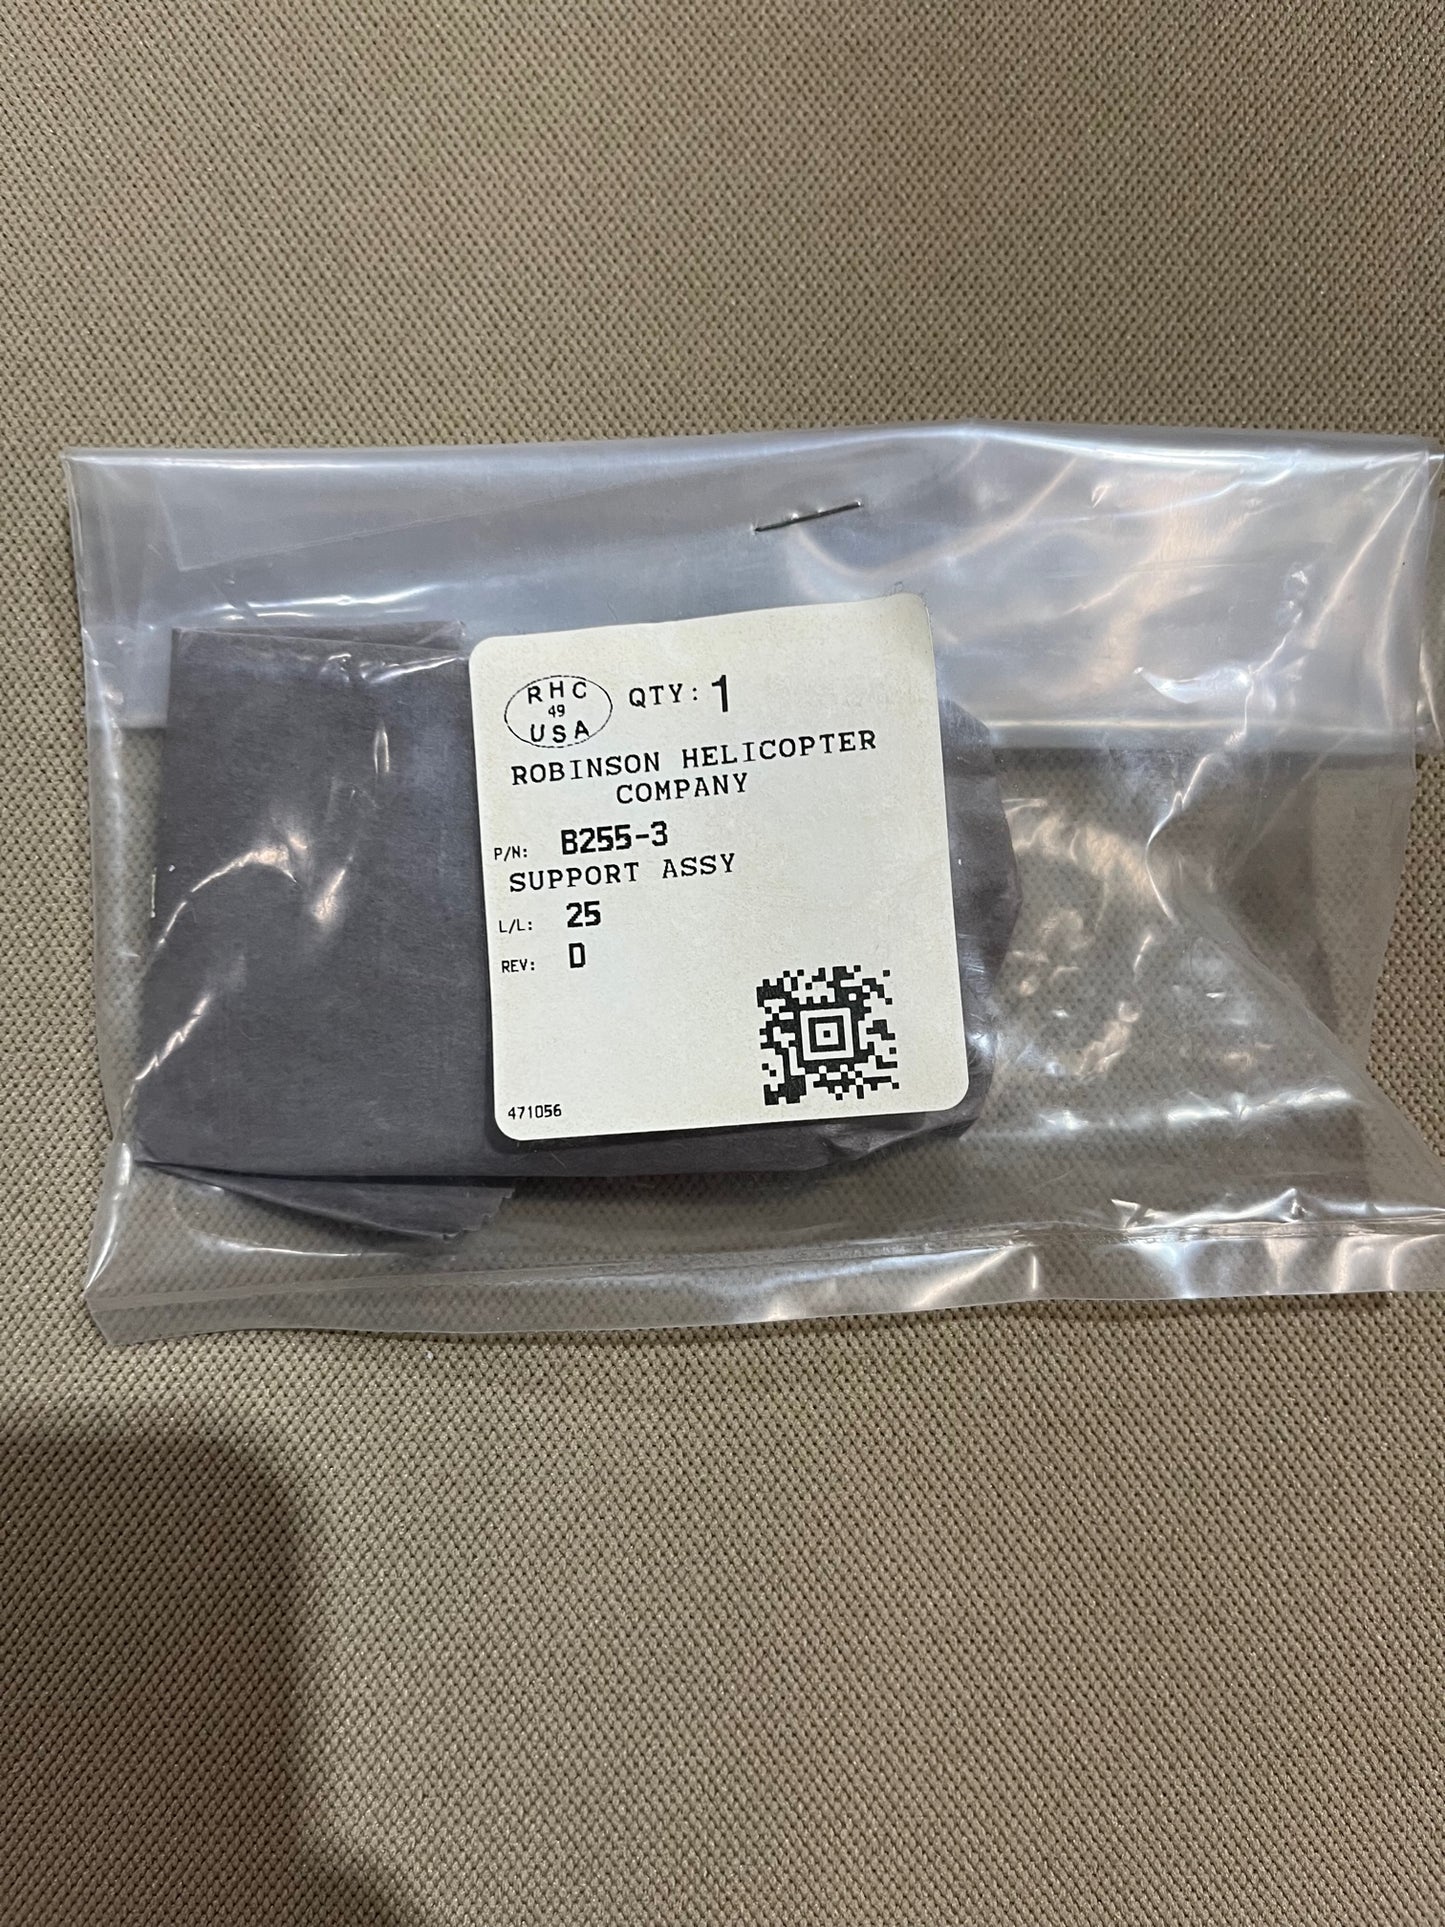 B255-3 SUPPORT ASSY